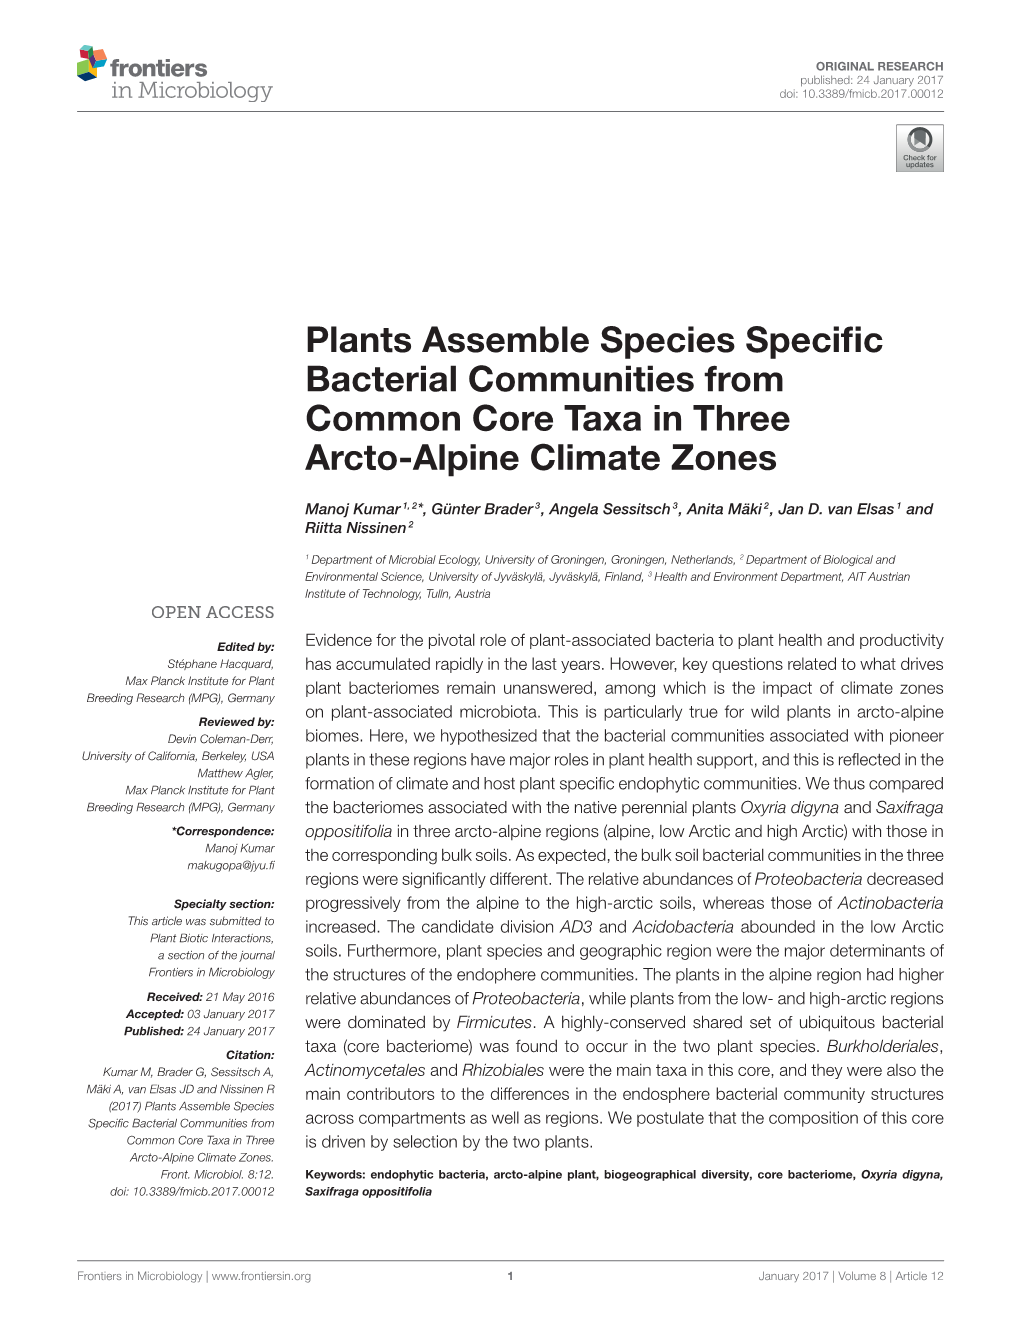 Plants Assemble Species Specific Bacterial Communities From